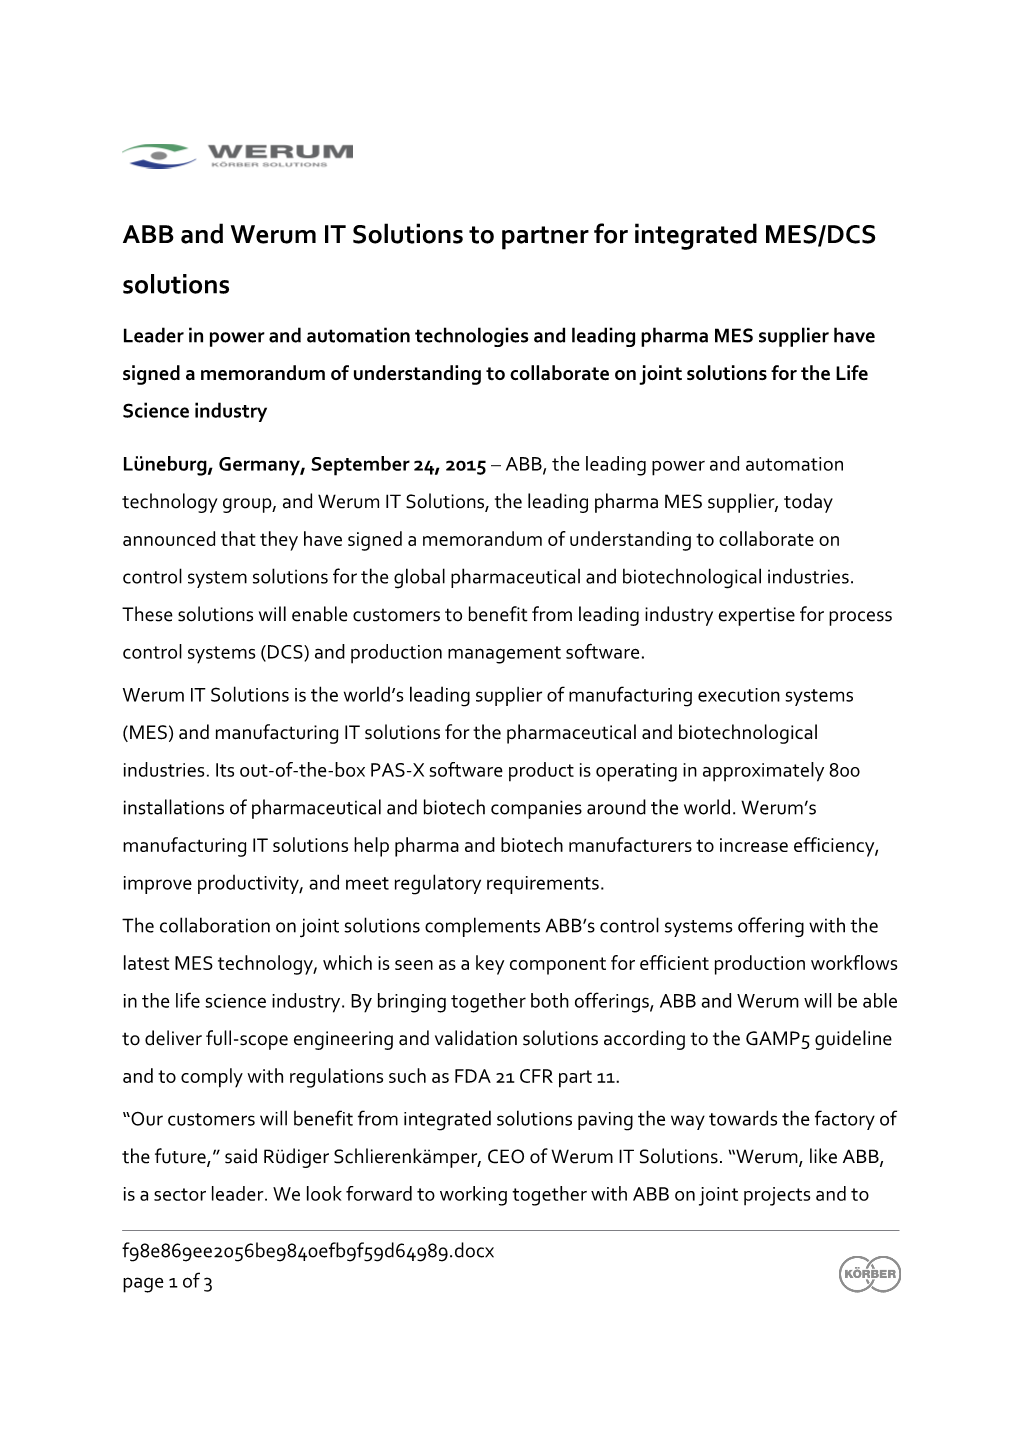 Leader in Power and Automation Technologies and Leading Pharma MES Supplier Have Signed